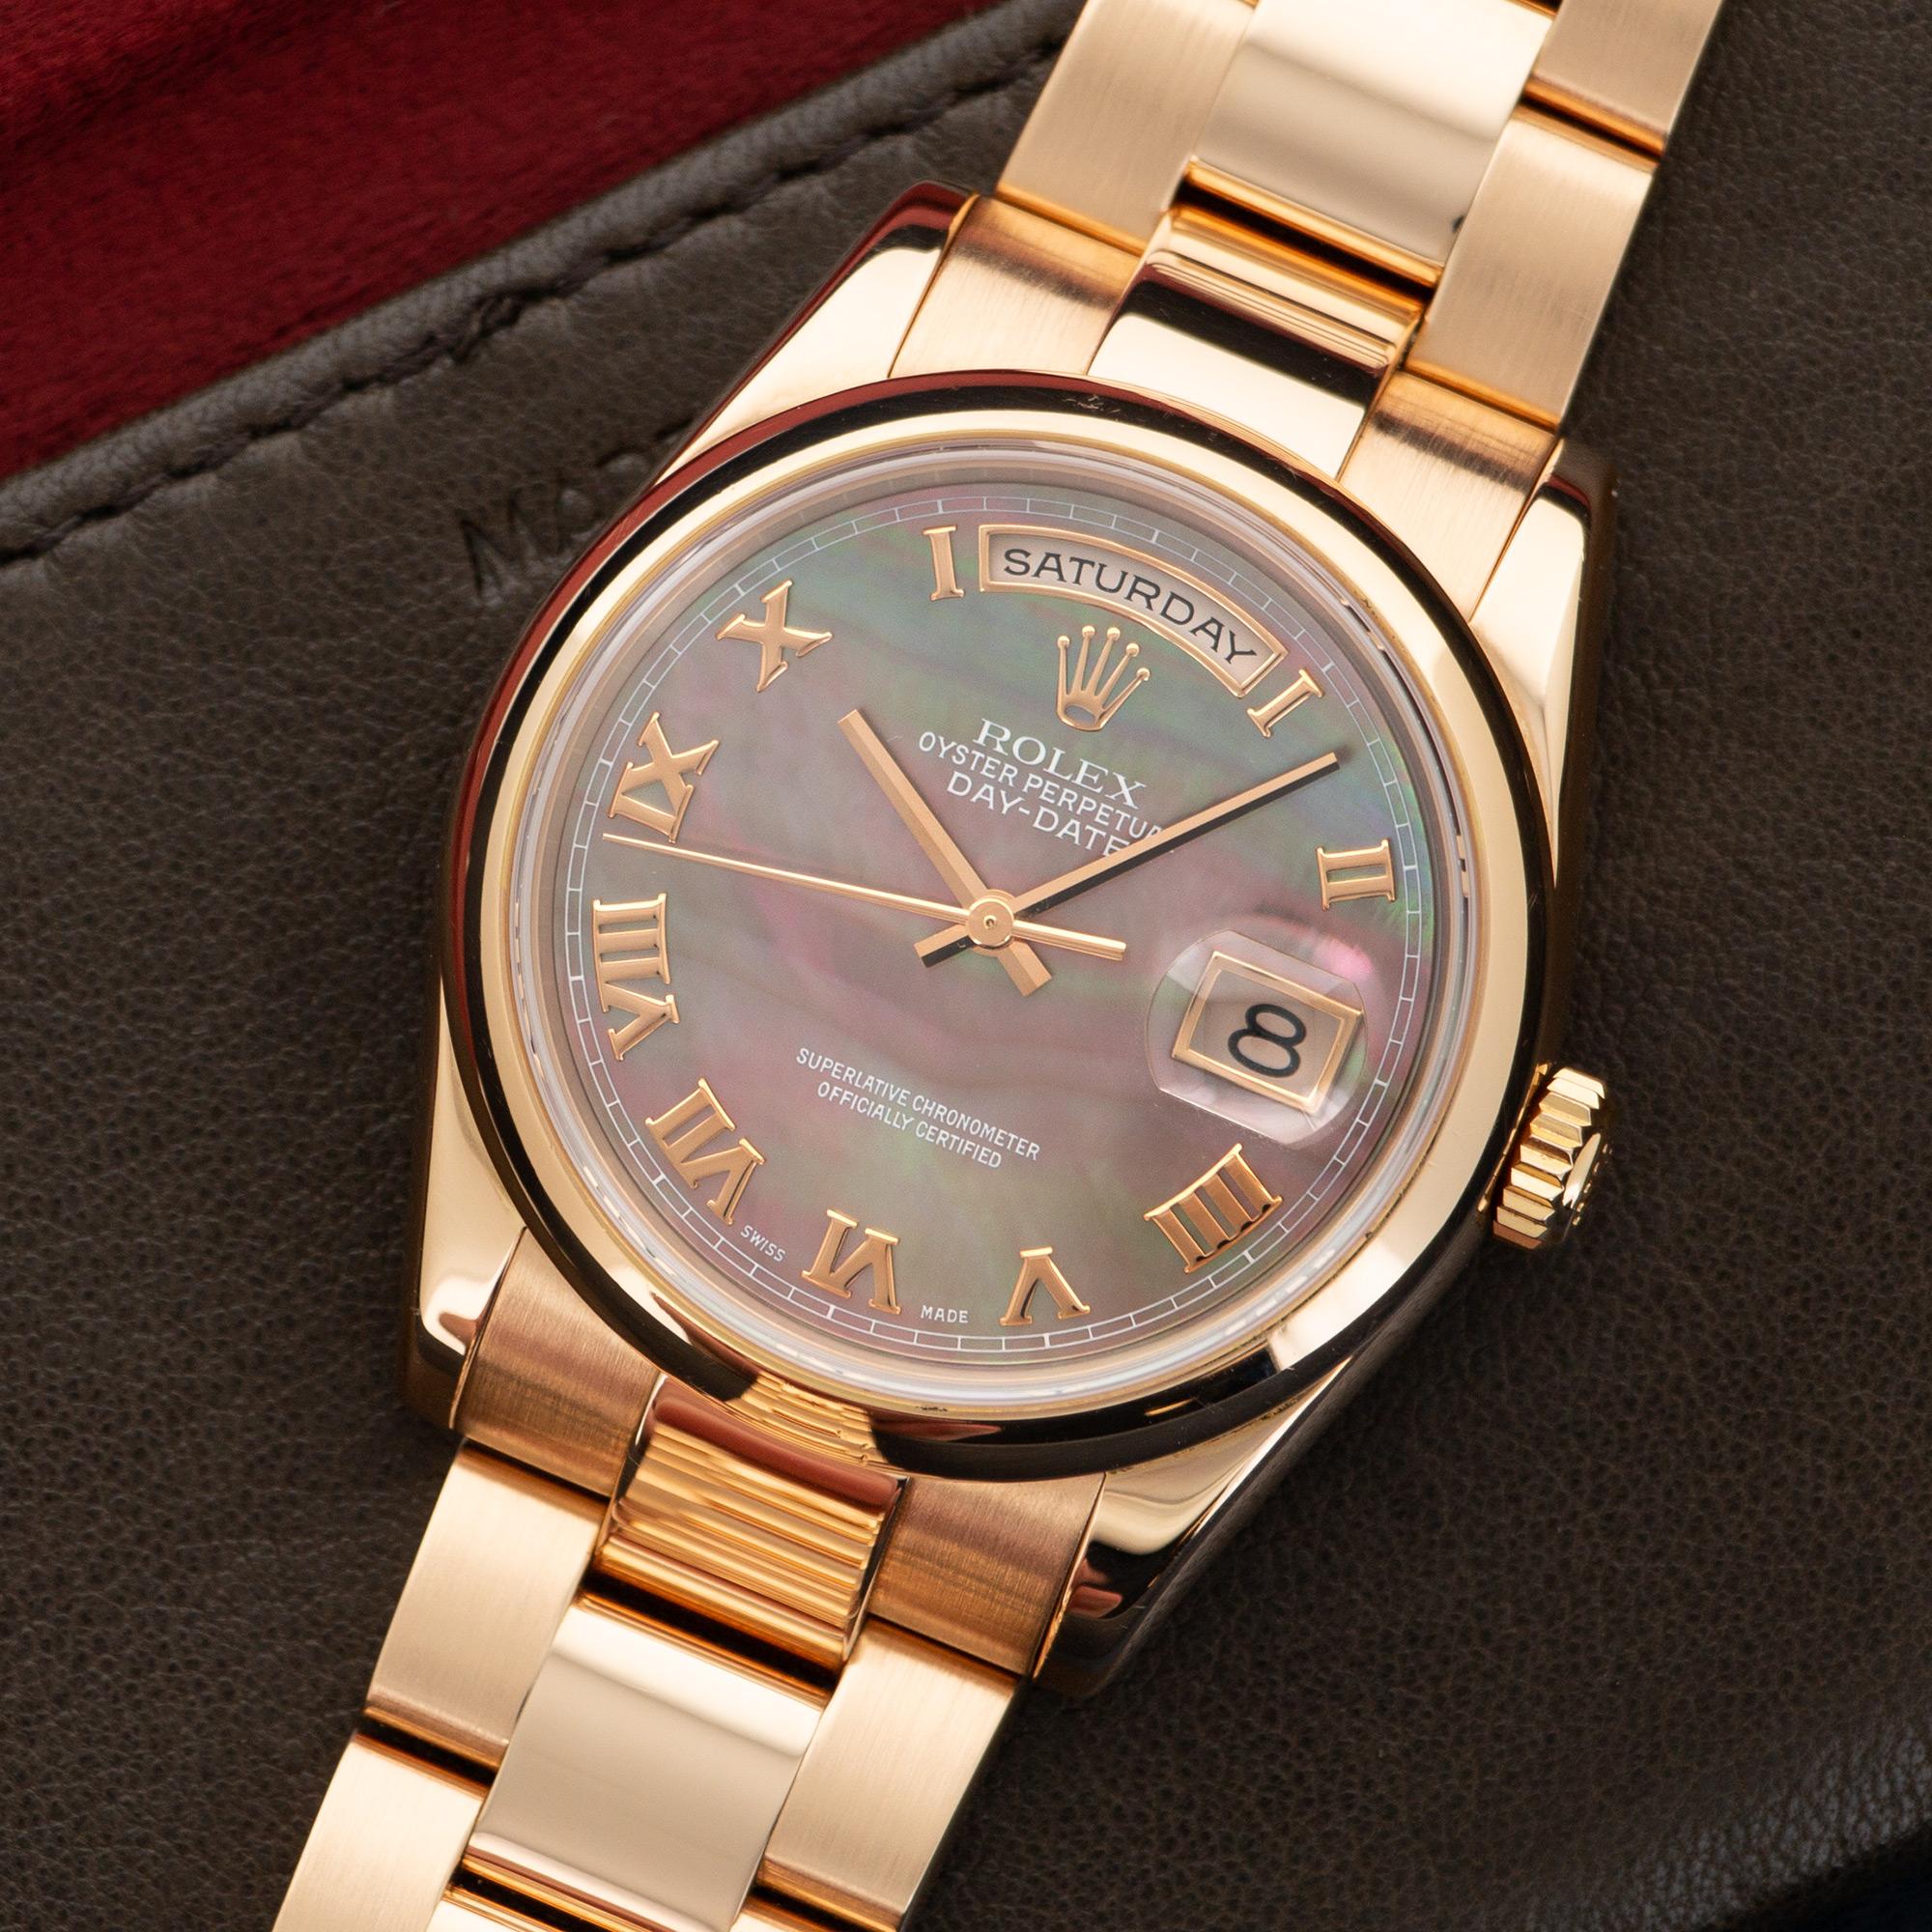 An 18k Rose Gold Day-Date Wristwatch by Rolex. Model 118205. Original Mother of Pearl Dial with Roman Numerals. Circa Early 2000's